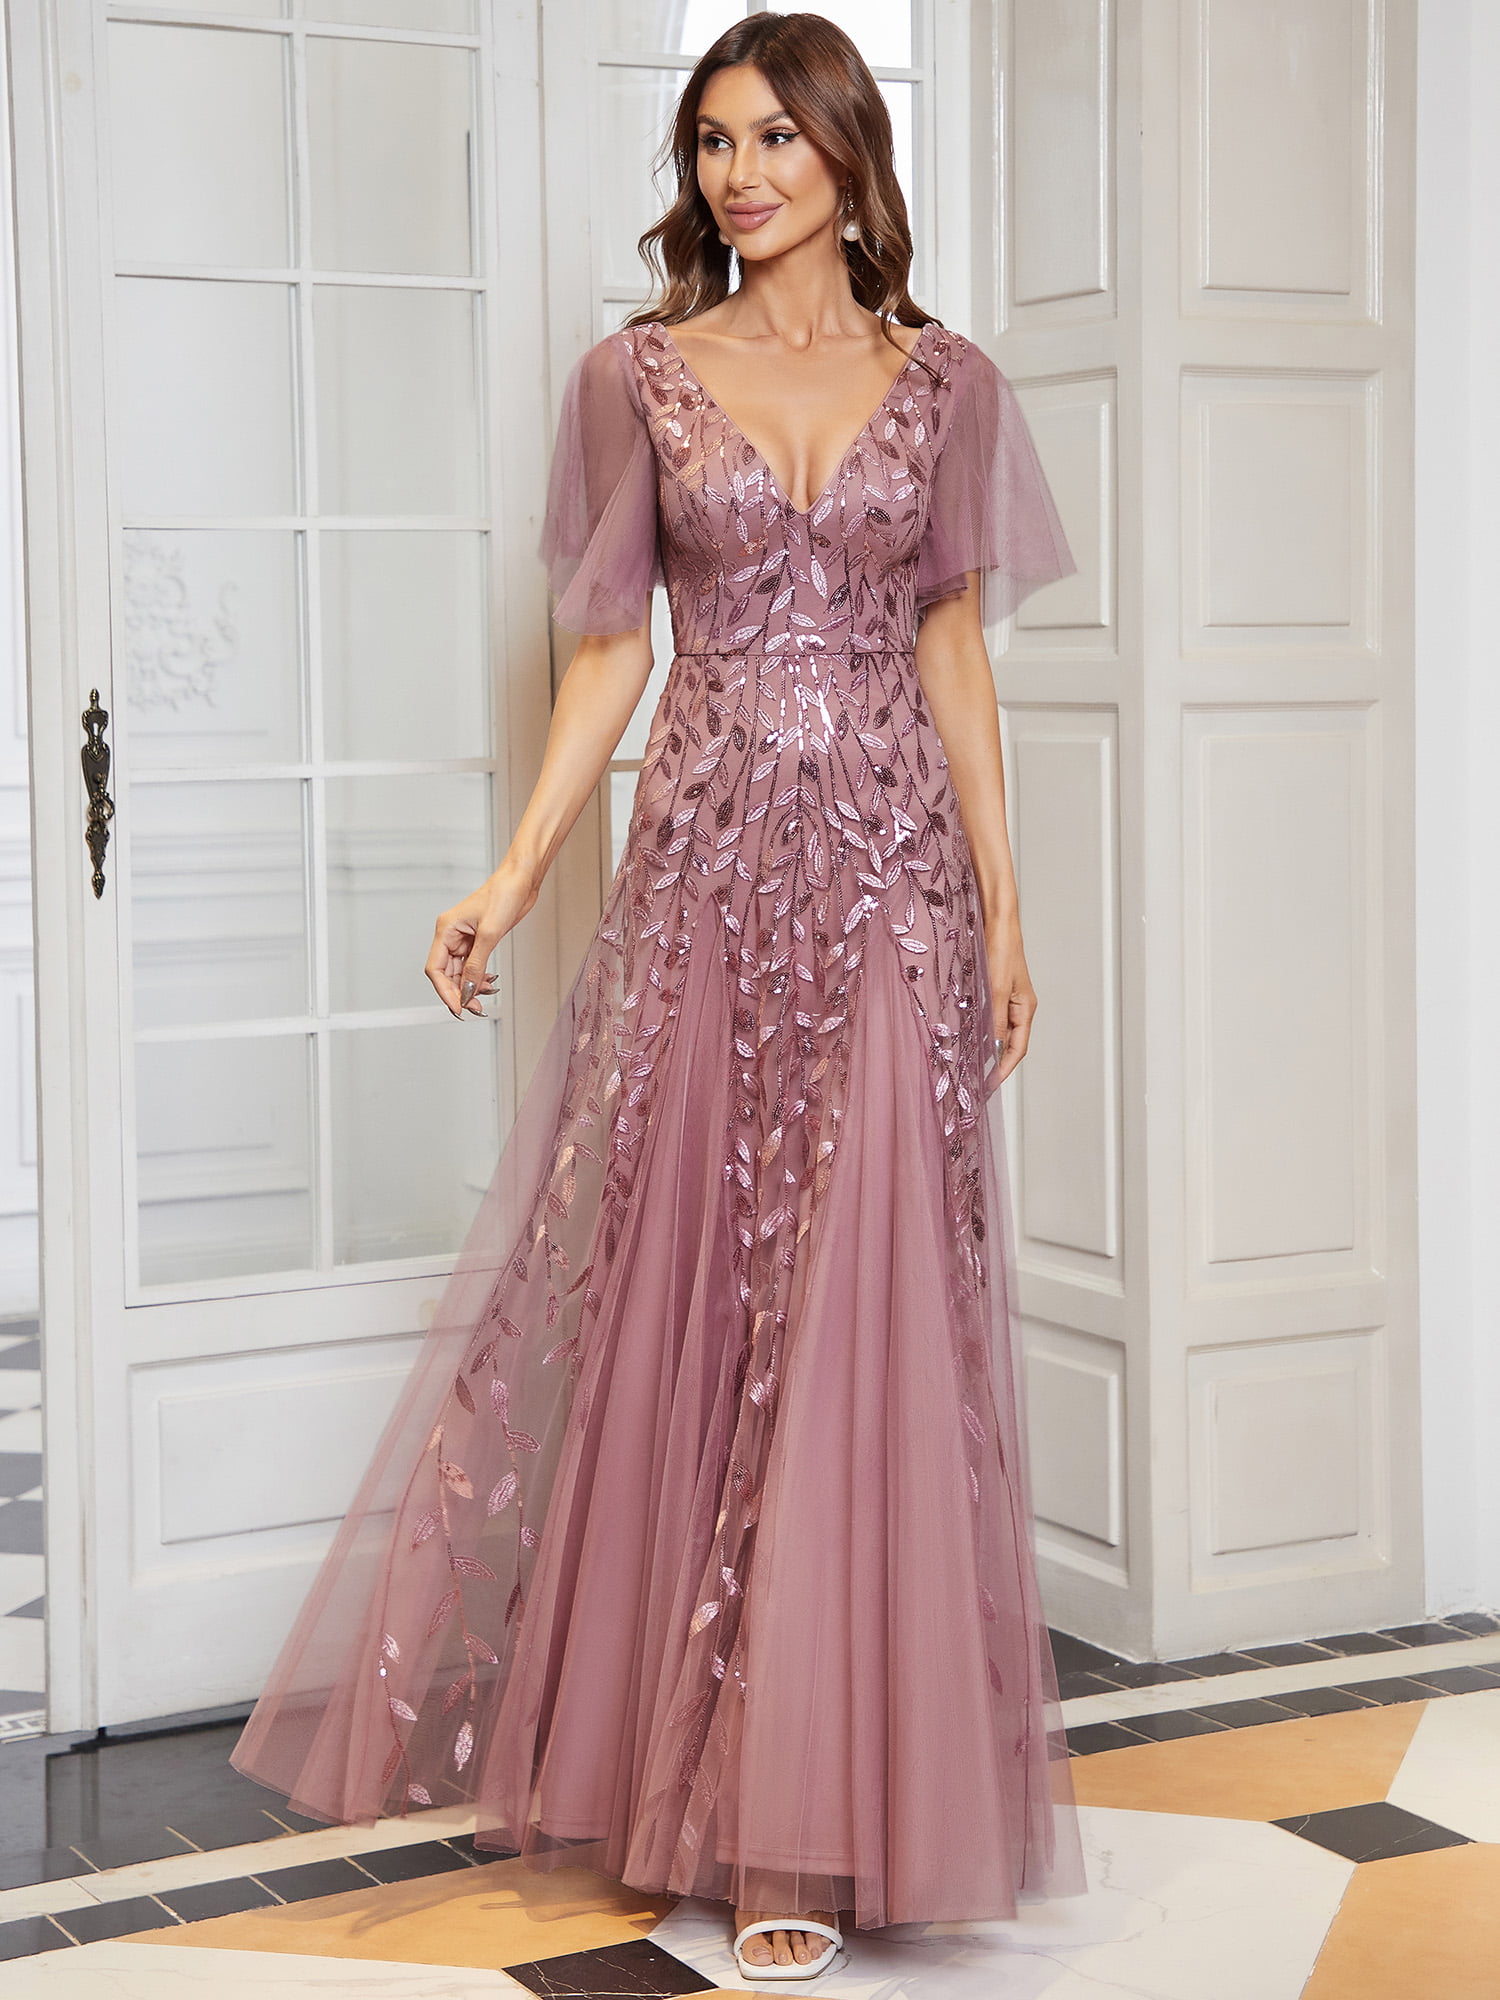 Ever-Pretty Women V-Neck Embroidery Wedding Evening Prom Dresses Party Ball Gown 